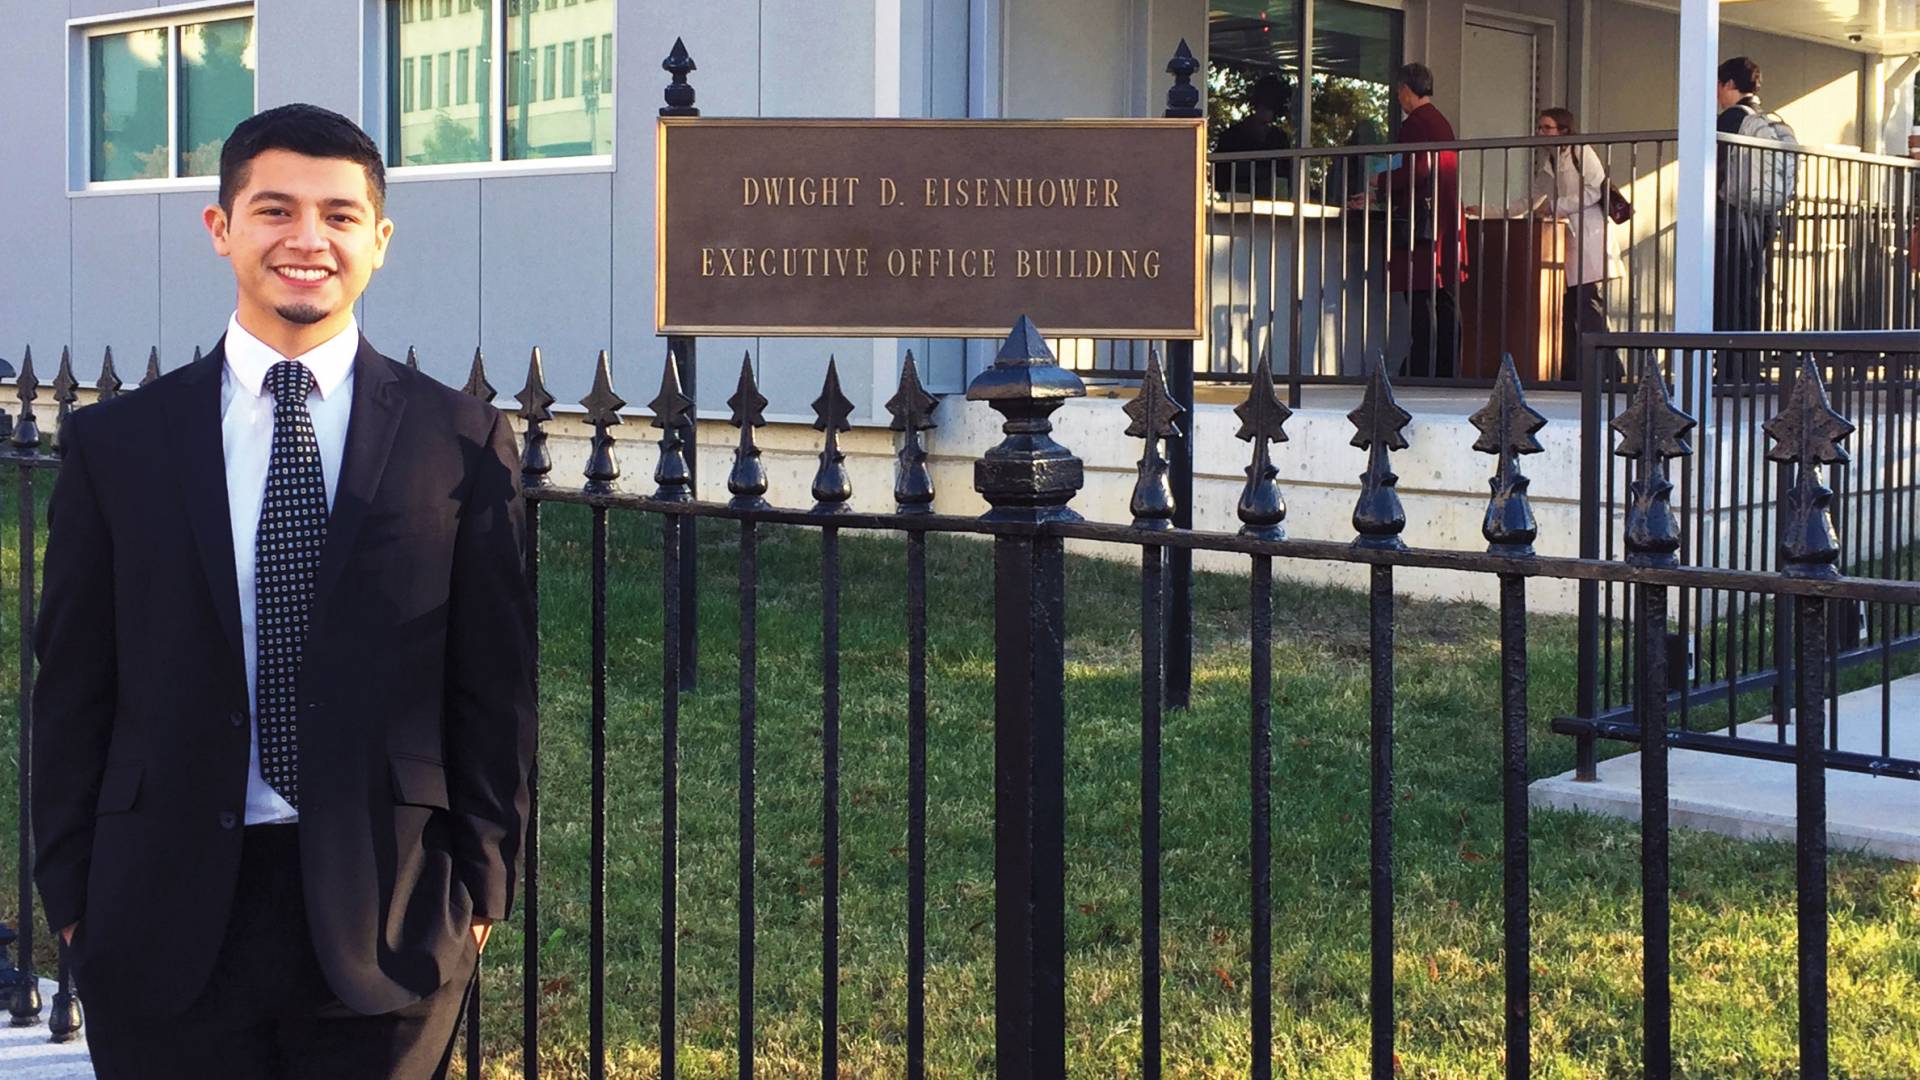 Luis Carchi standing outside Dwight D. Eisenhower building